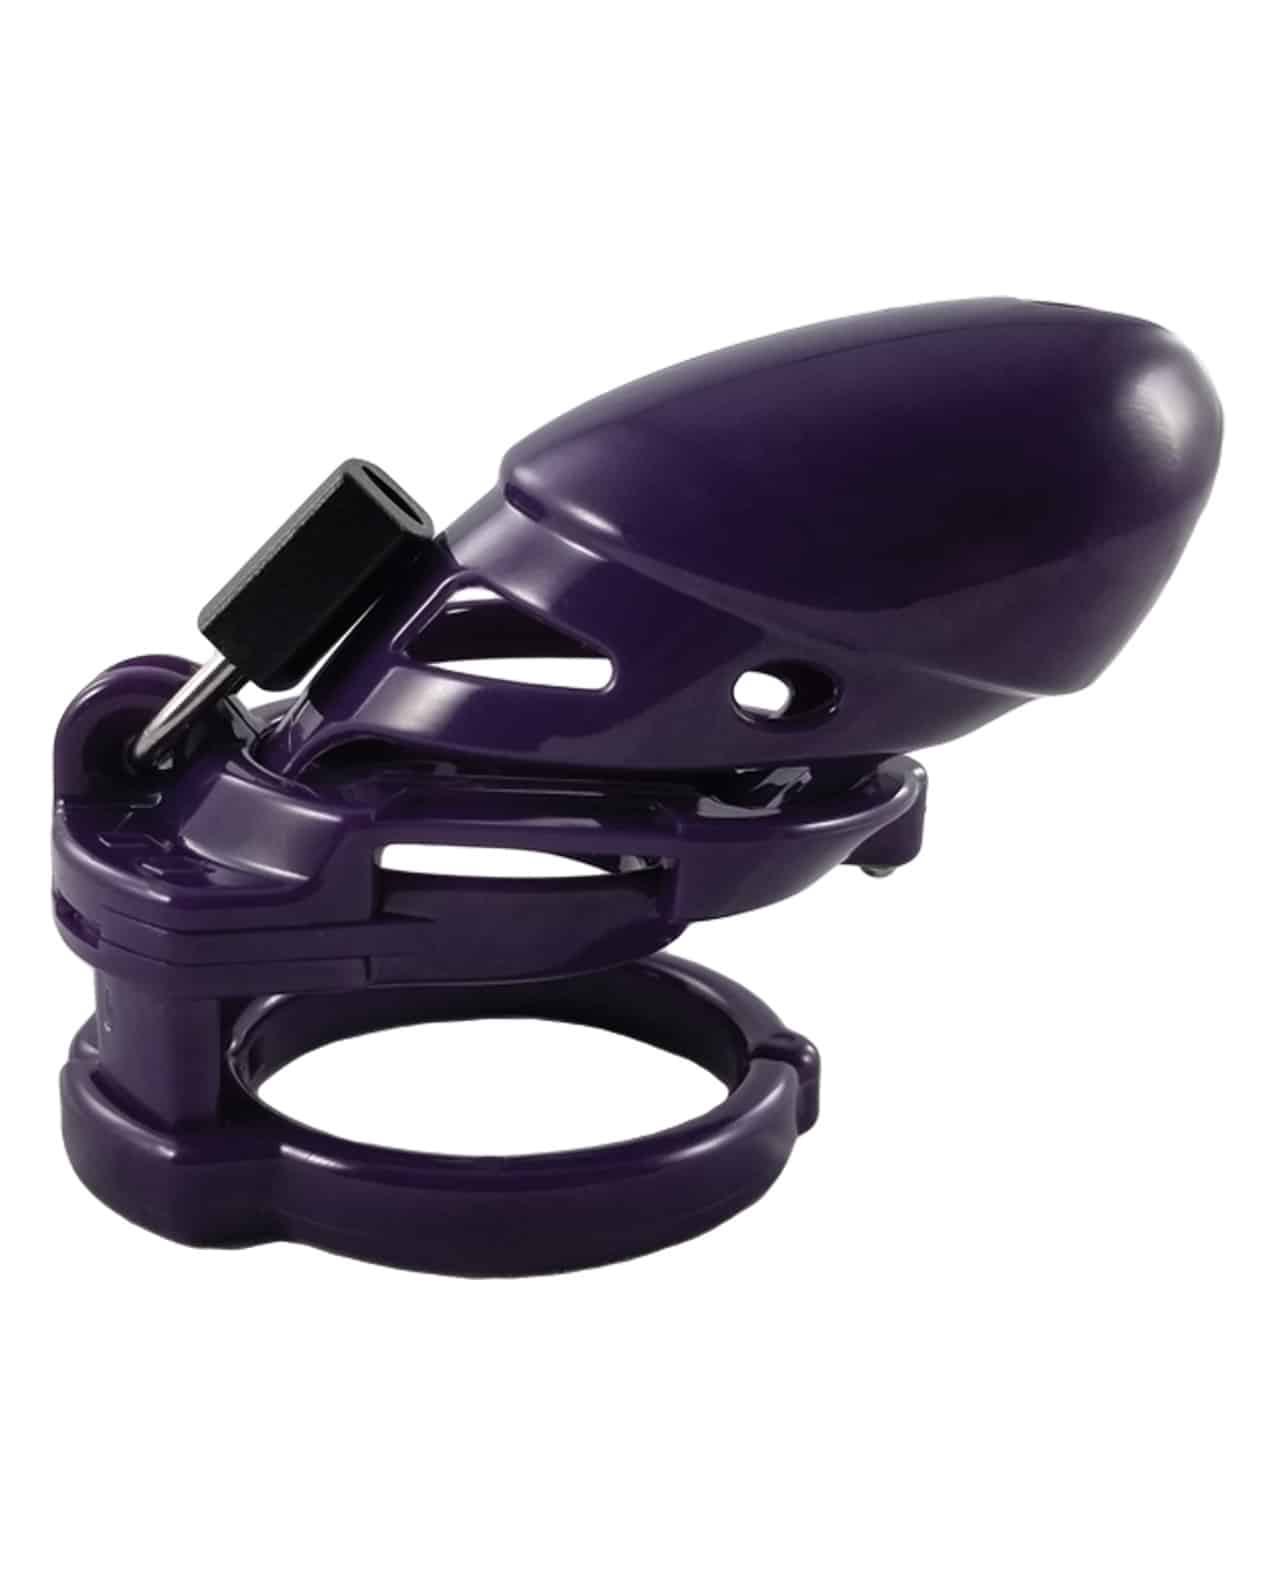 Locked In Lust The Vice Plus Purple Sex Toy